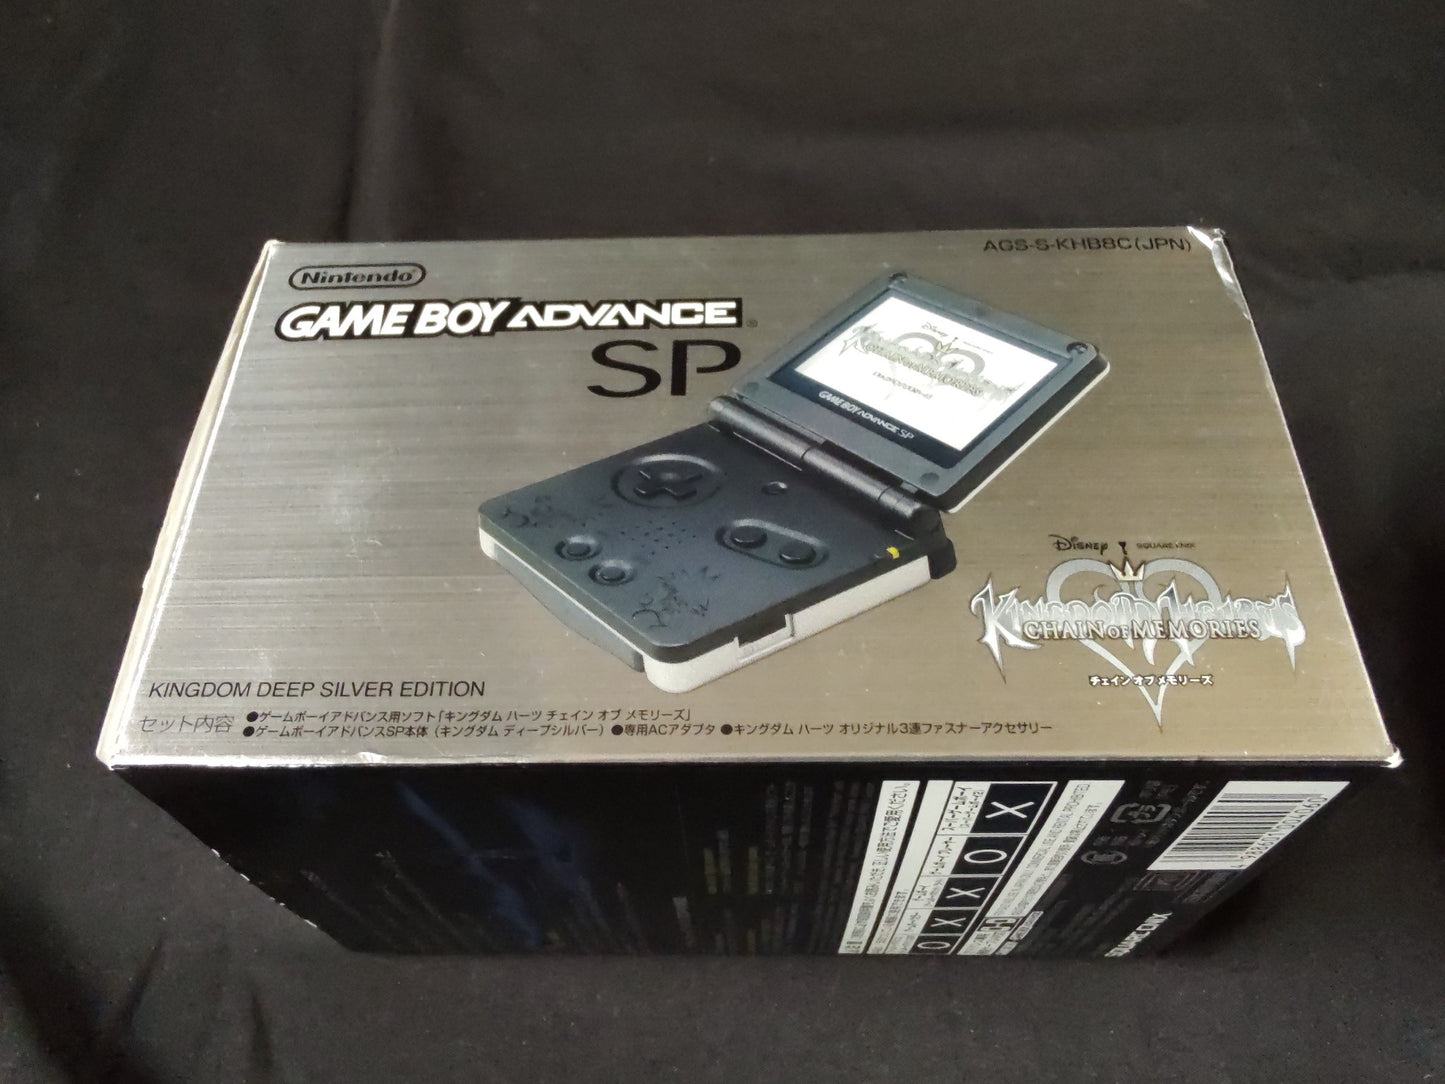 KINGDOM HEARTS LIMITED GAMEBOY ADVANCE SP CONSOLE set Boxed/ Working-f0901-